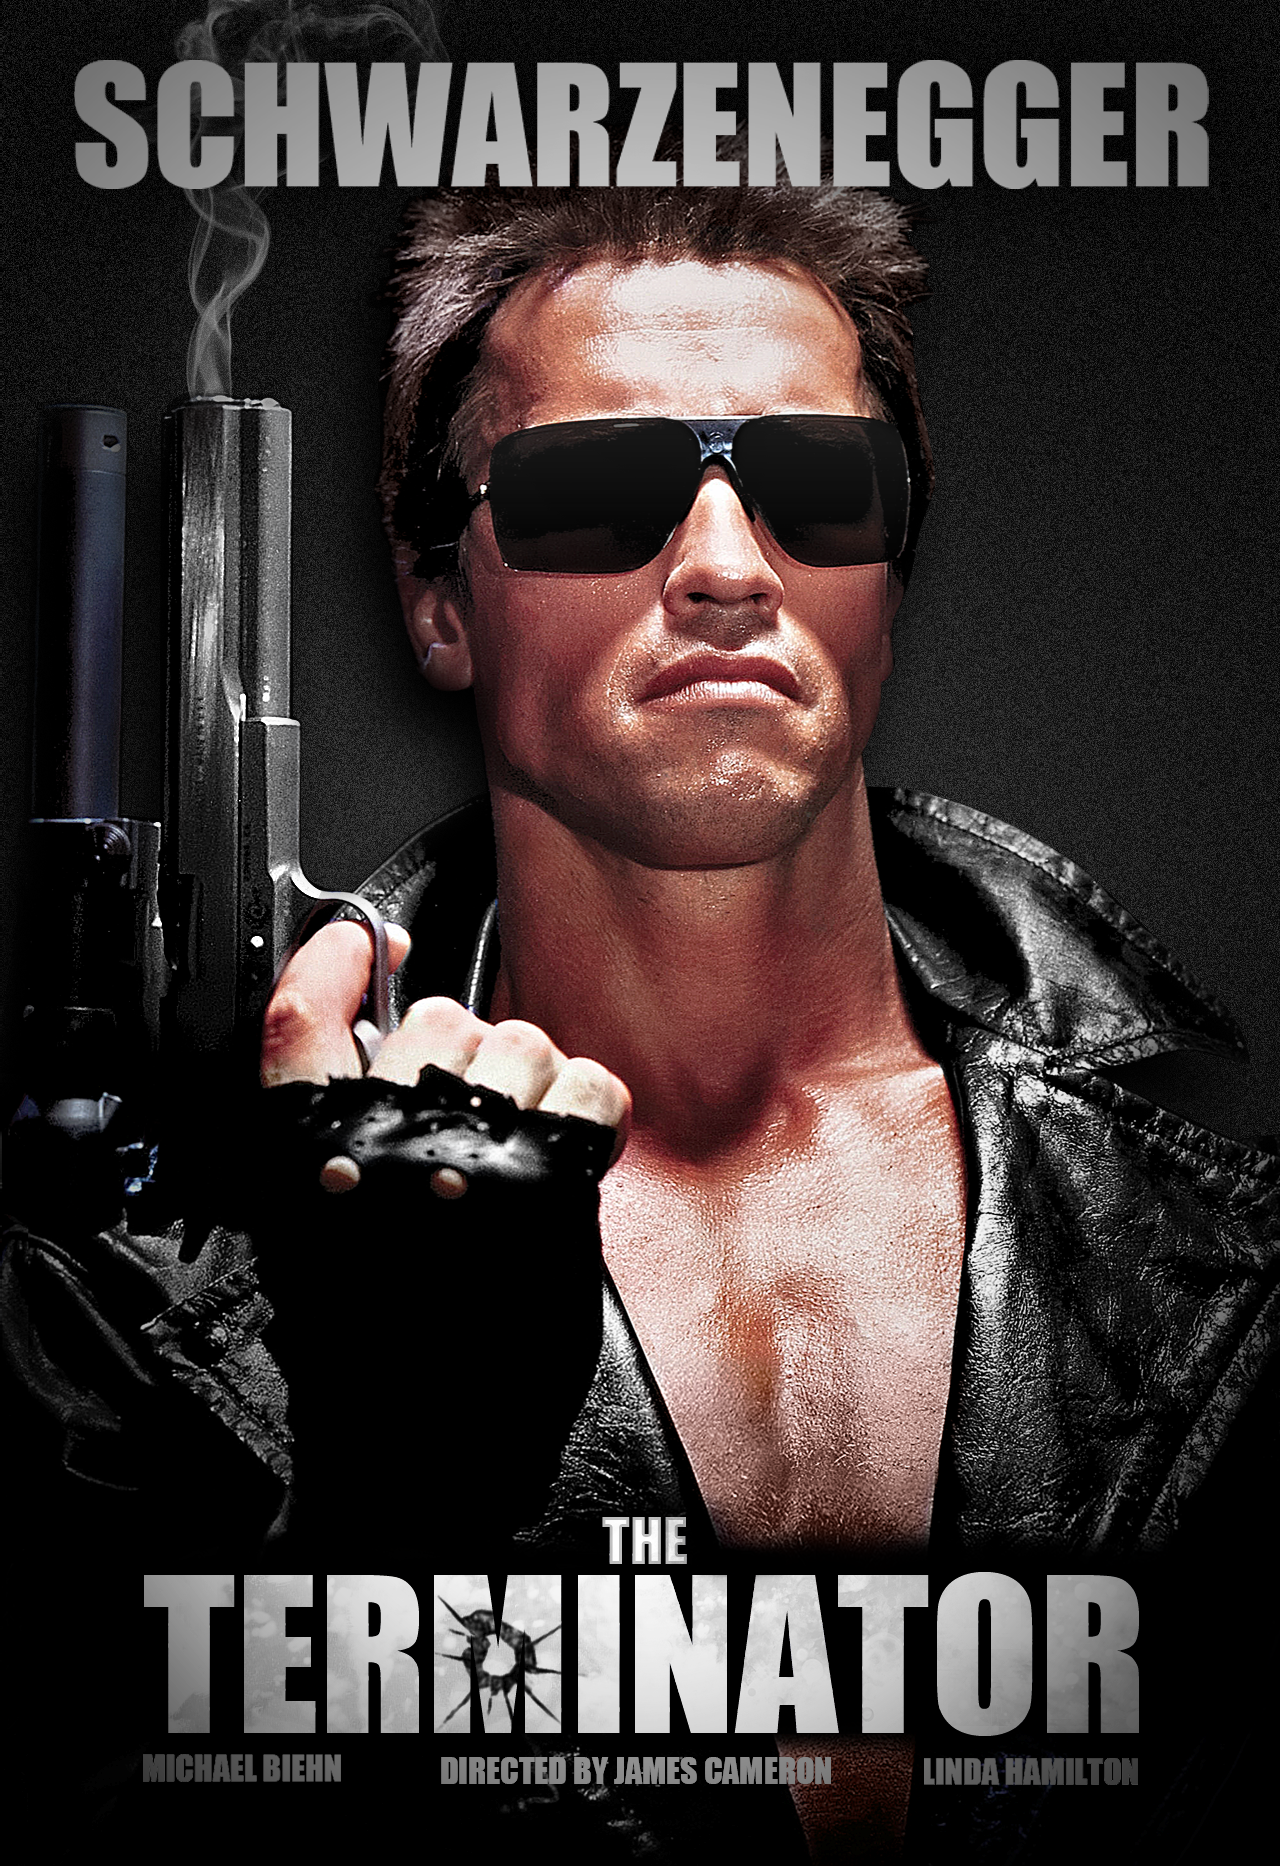 the terminator fan-made cover